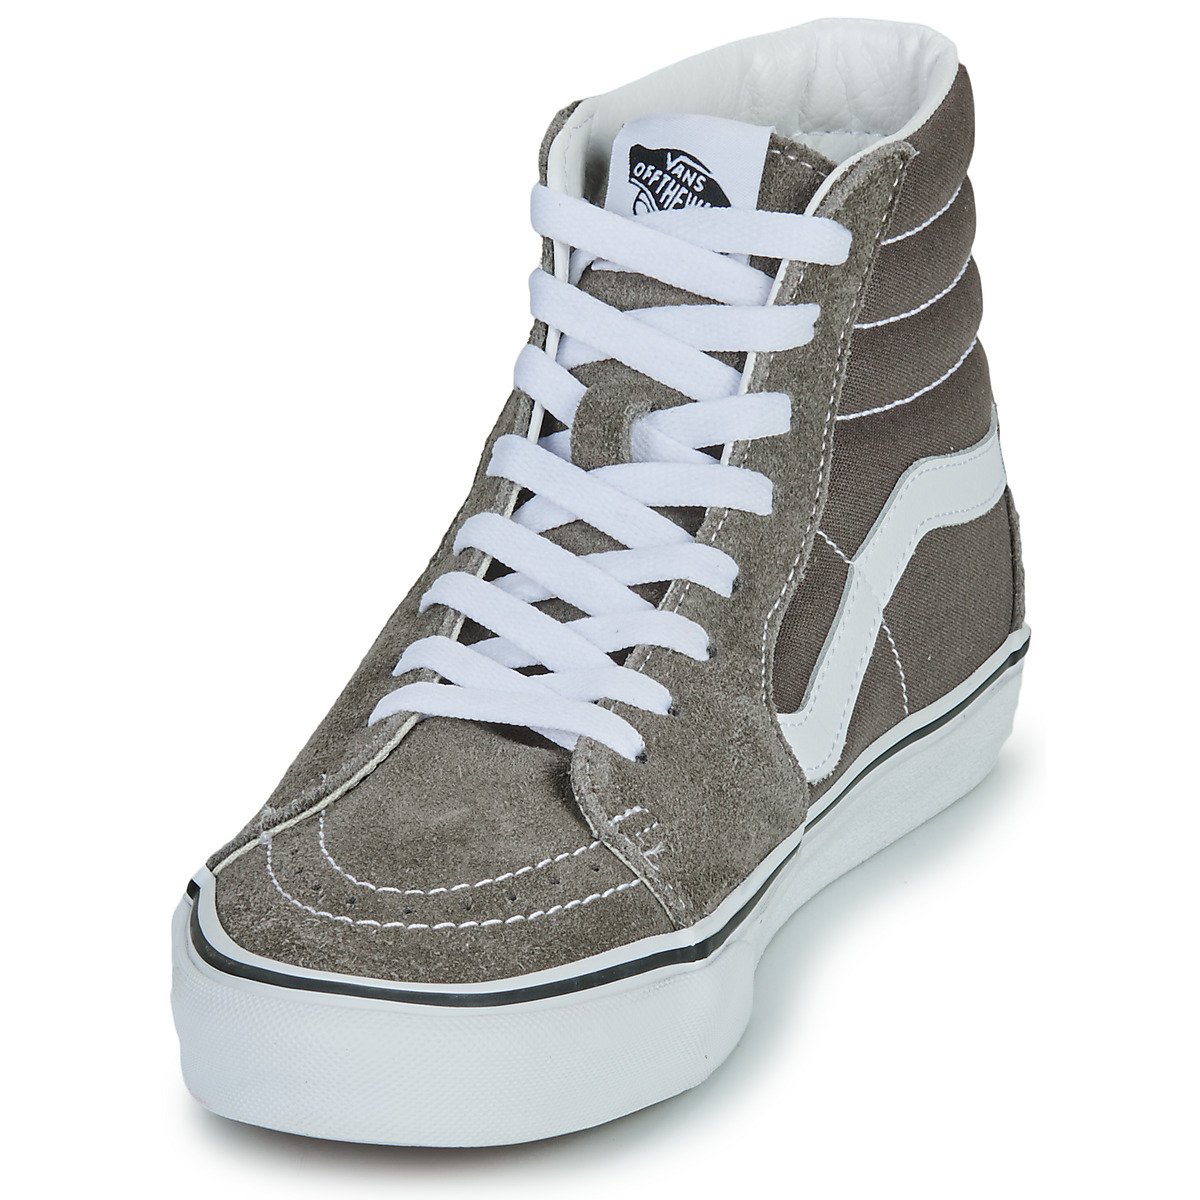 Shoes (High-top Trainers) SK8-Hi